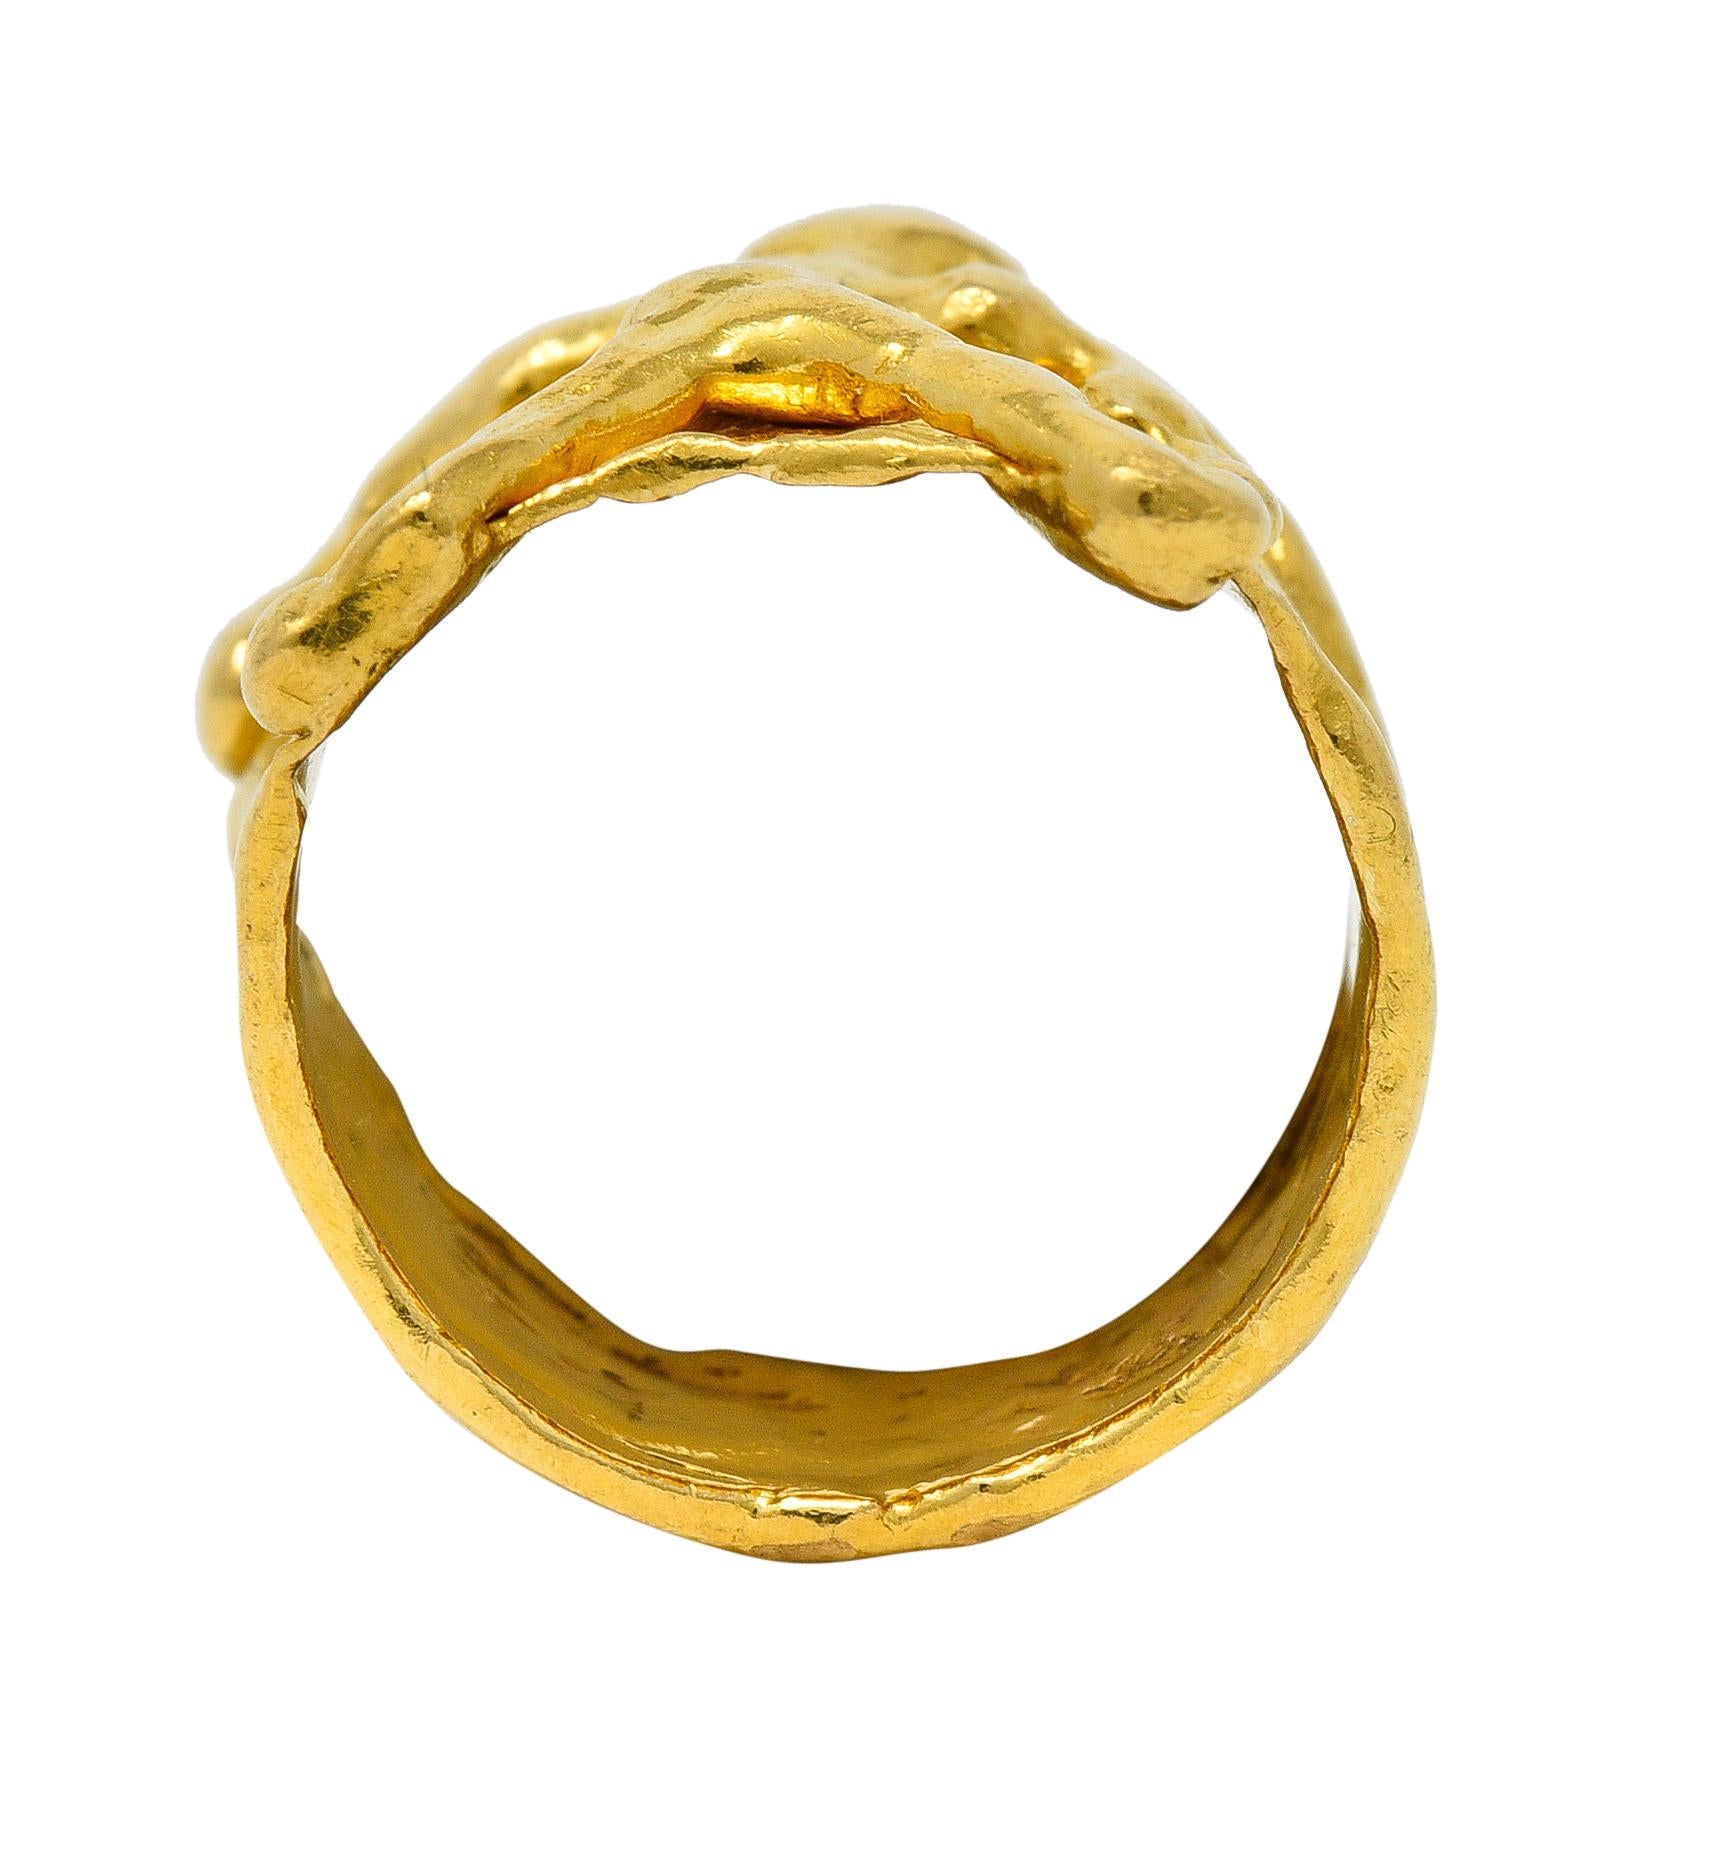 Jean Mahie 22 Karat Yellow Gold Charming Monsters Figural Vintage Wide Band Ring For Sale 1